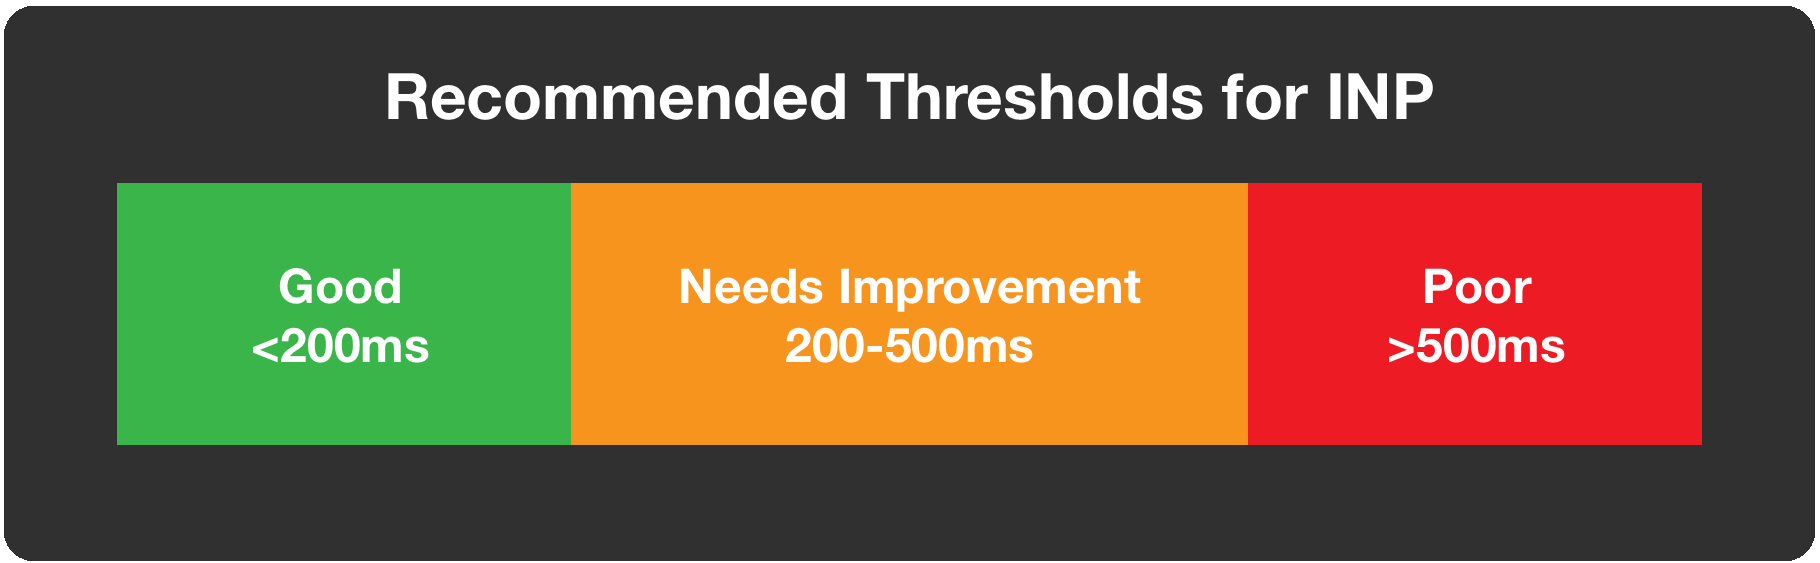 Illustration of recommended thresholds for Good (<200ms), Needs Improvement(200-500ms) and Poor(>500ms)